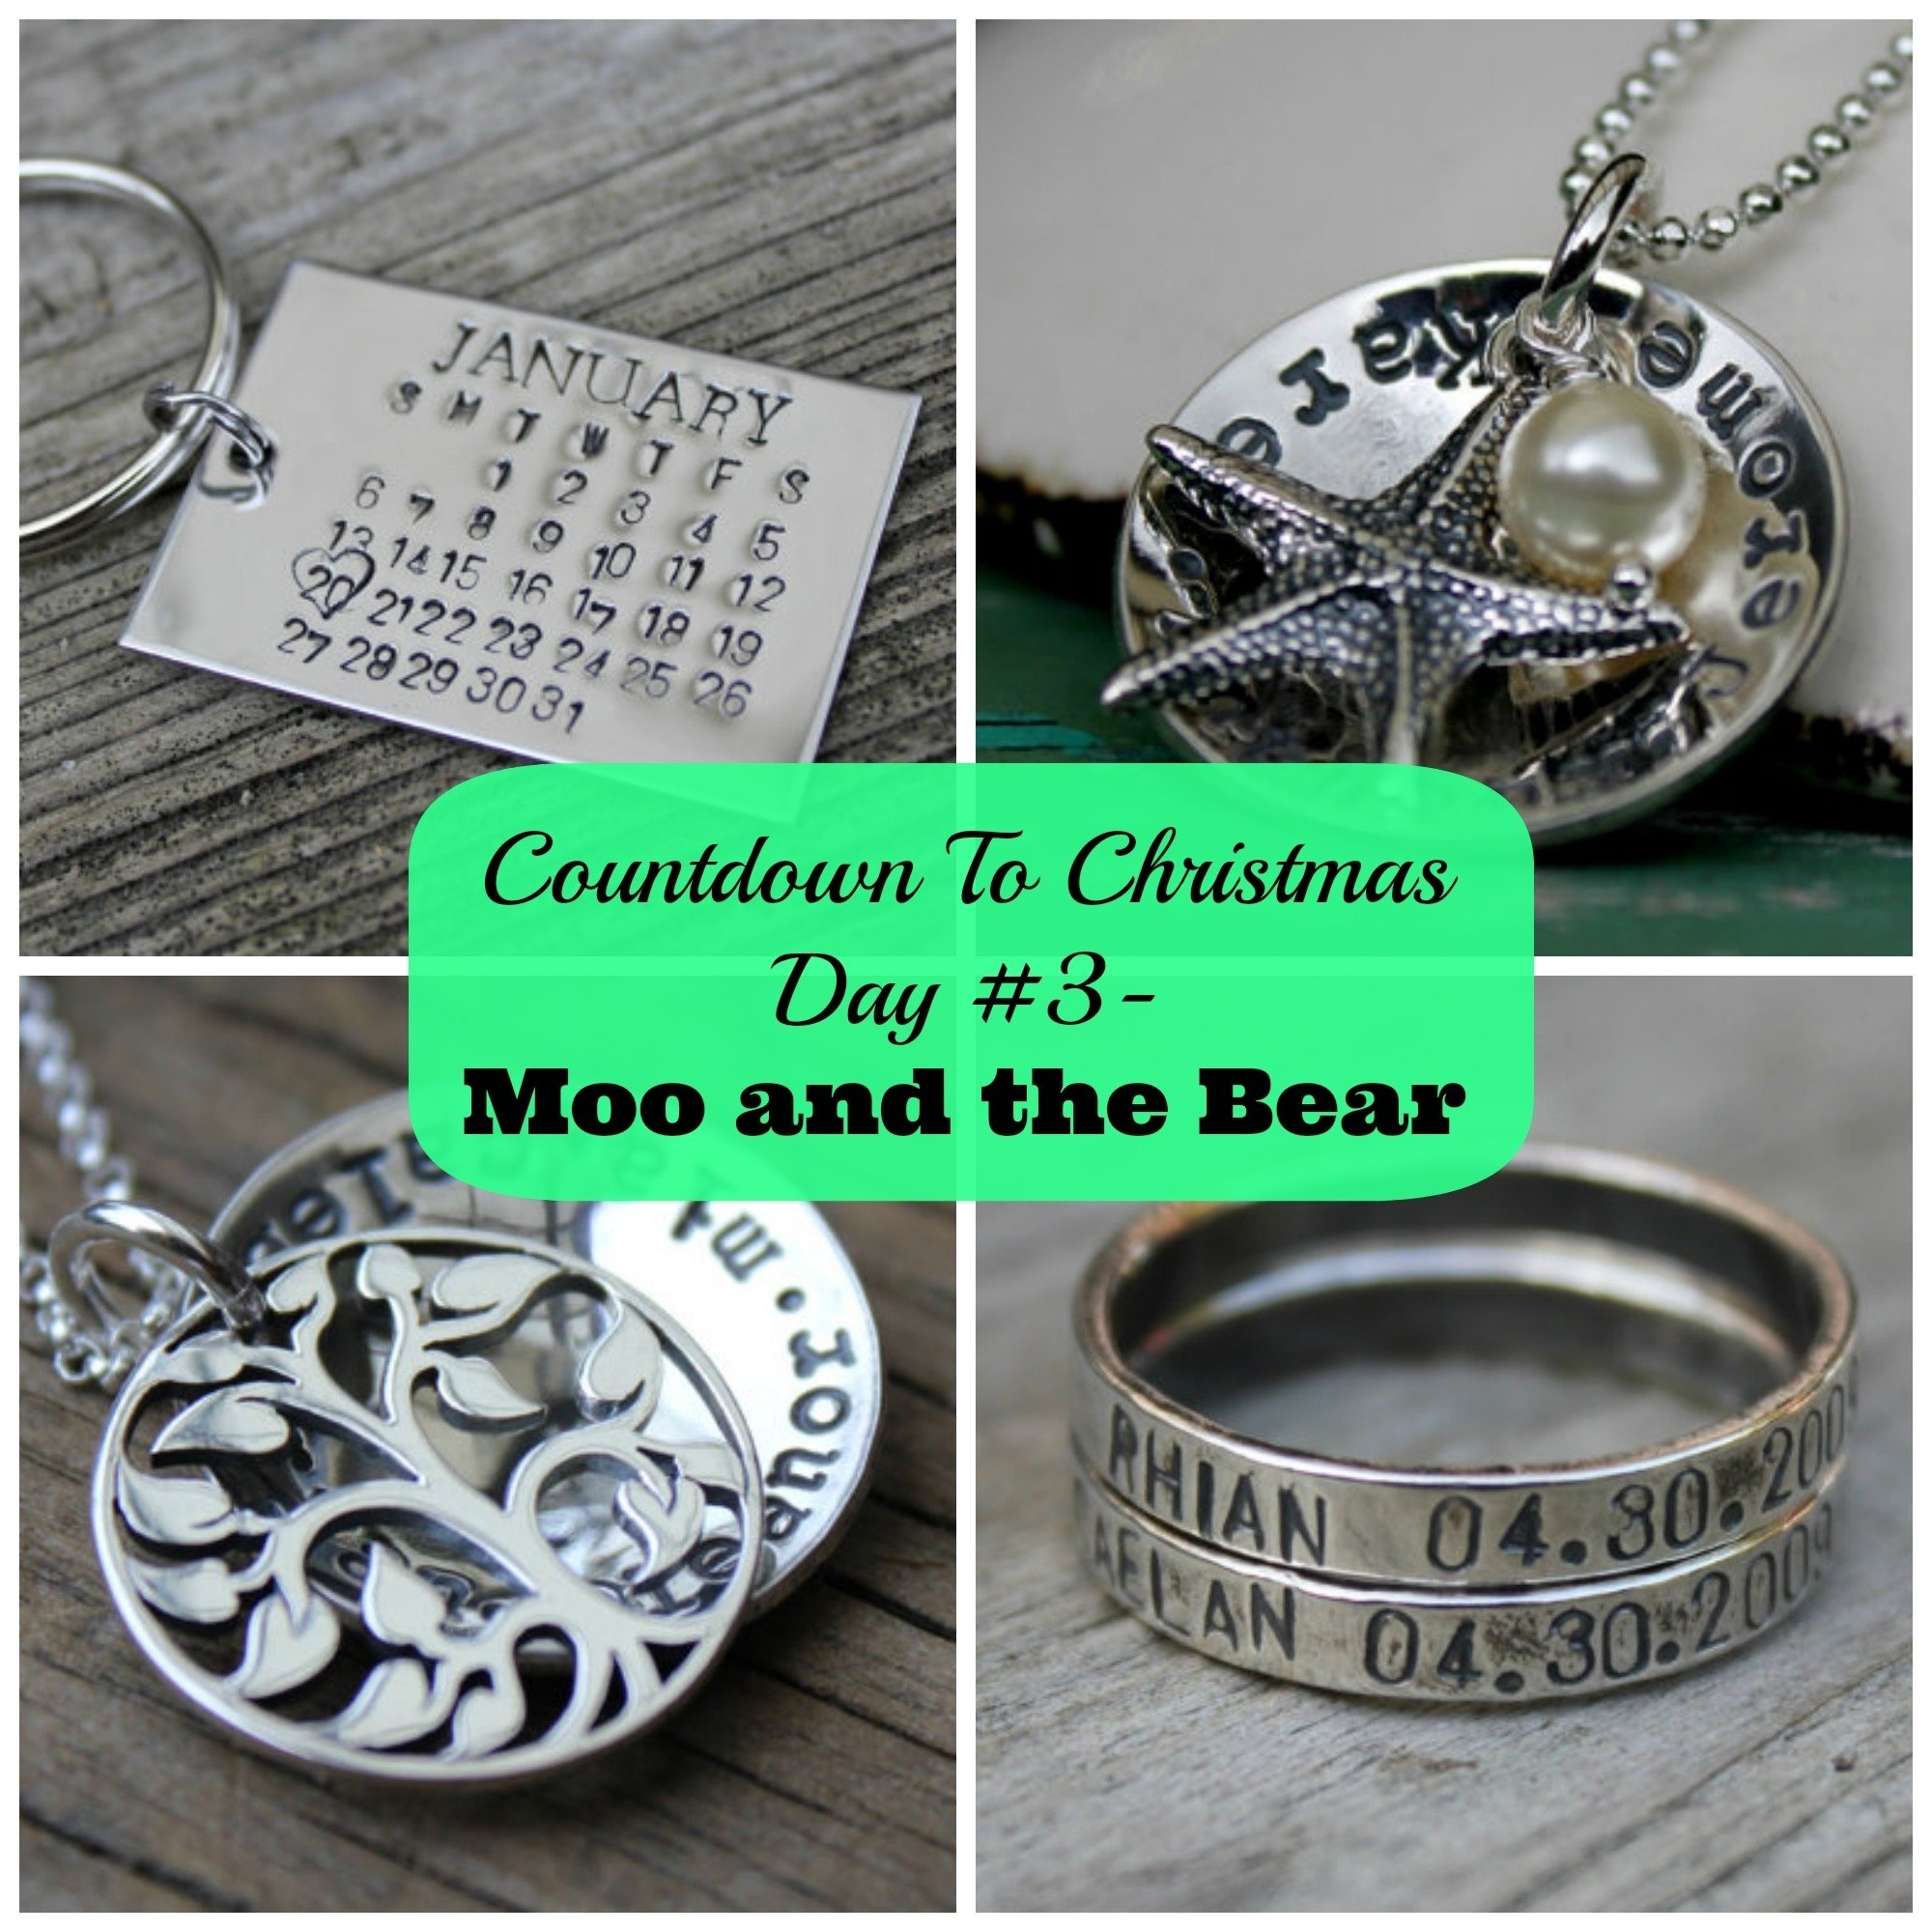 10 Trendy Christmas Gift Ideas For A Boyfriend countdown to christmas day 3 moo and the bear gifts for her and 4 2022